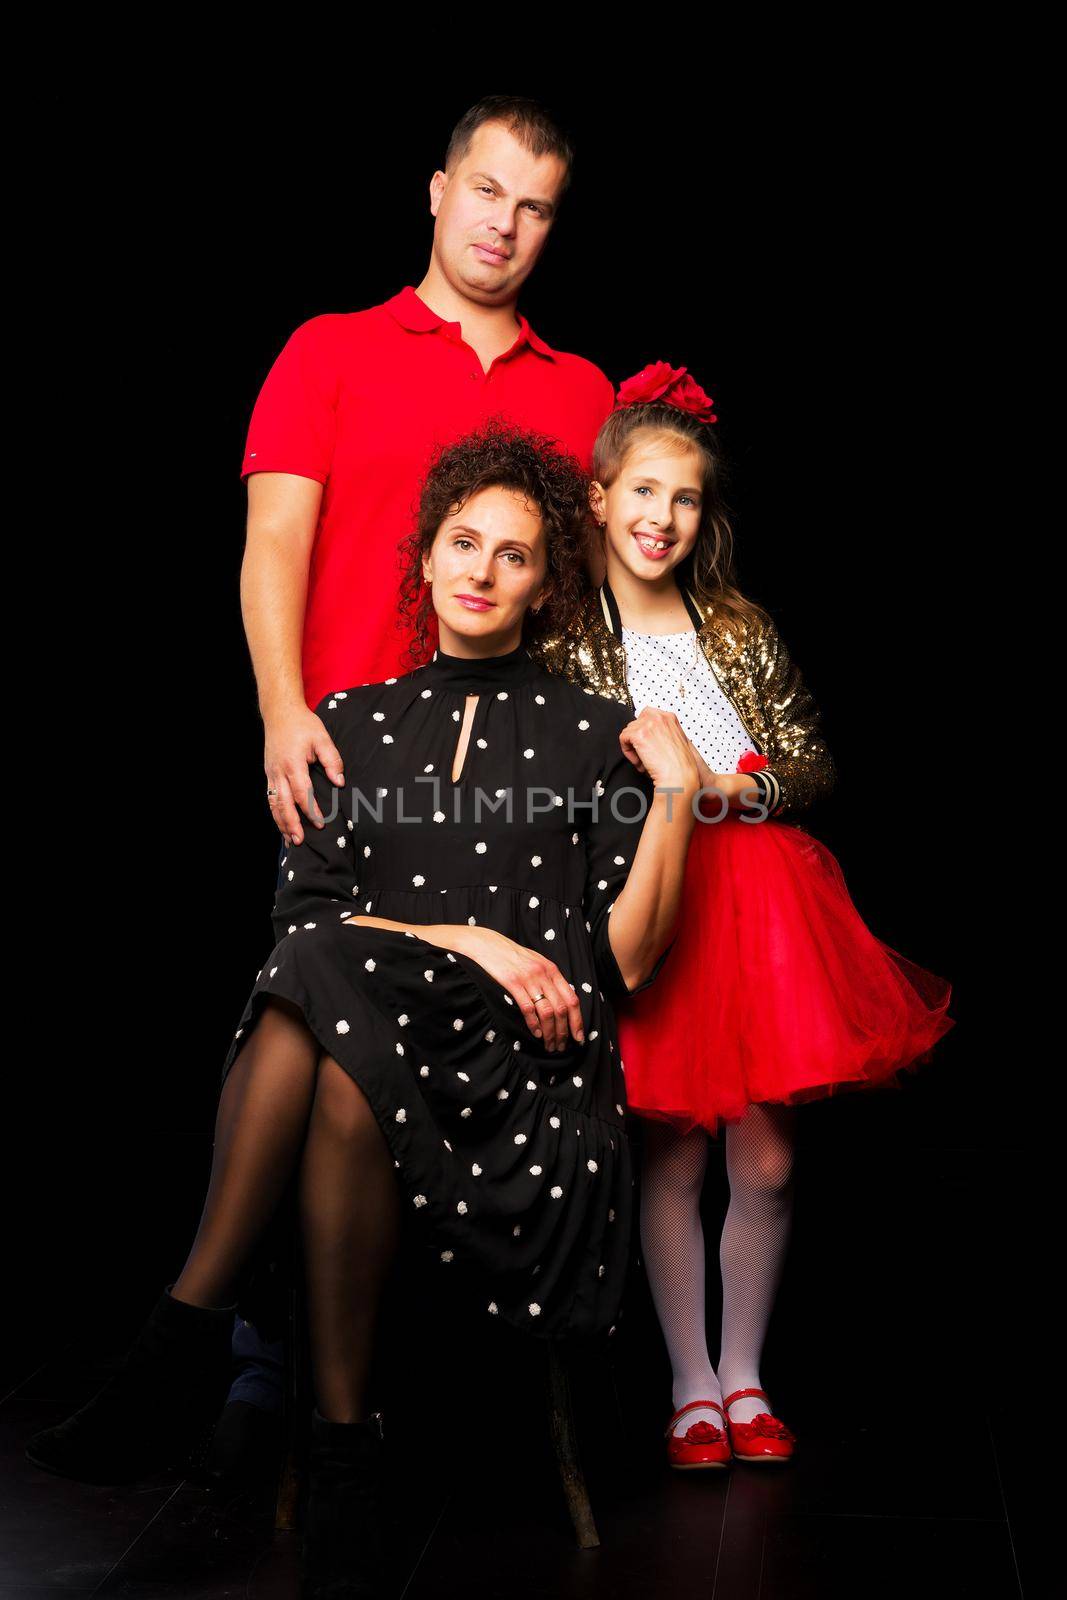 Family portrait, mom and dad with a charming little daughter. On a black background. The concept of family happiness.